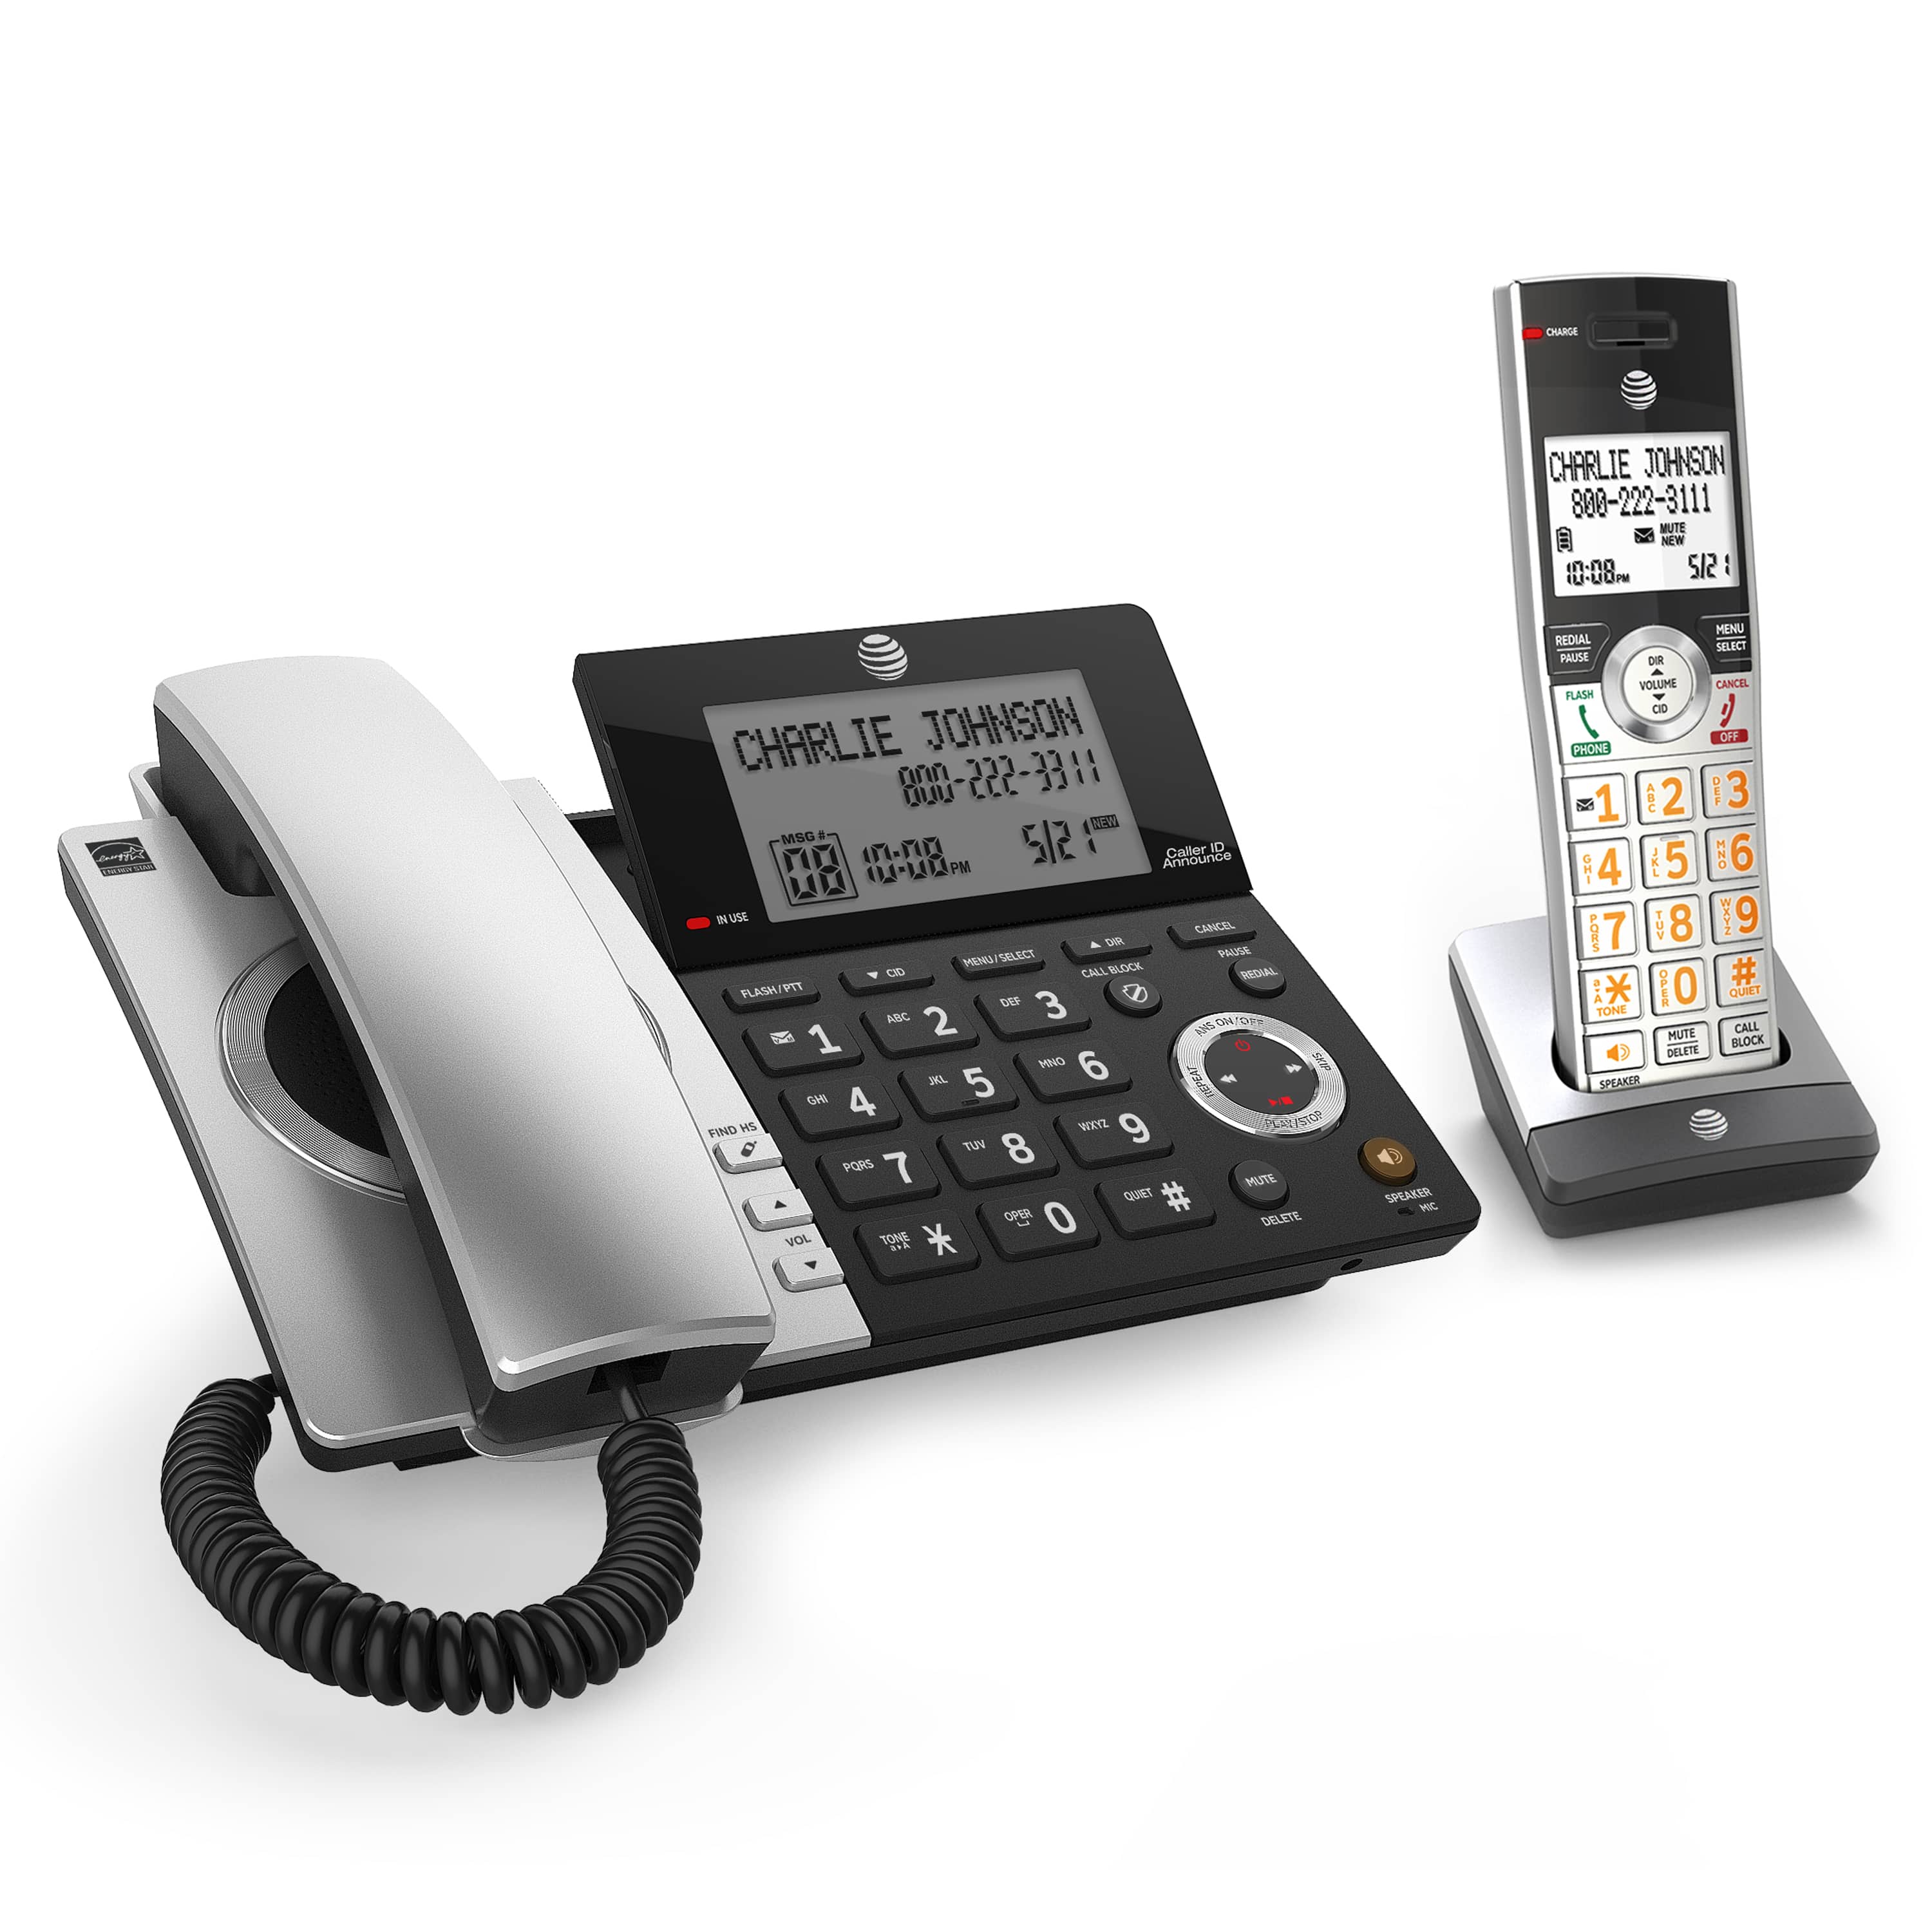 Corded/cordless answering system with smart call blocker - view 2